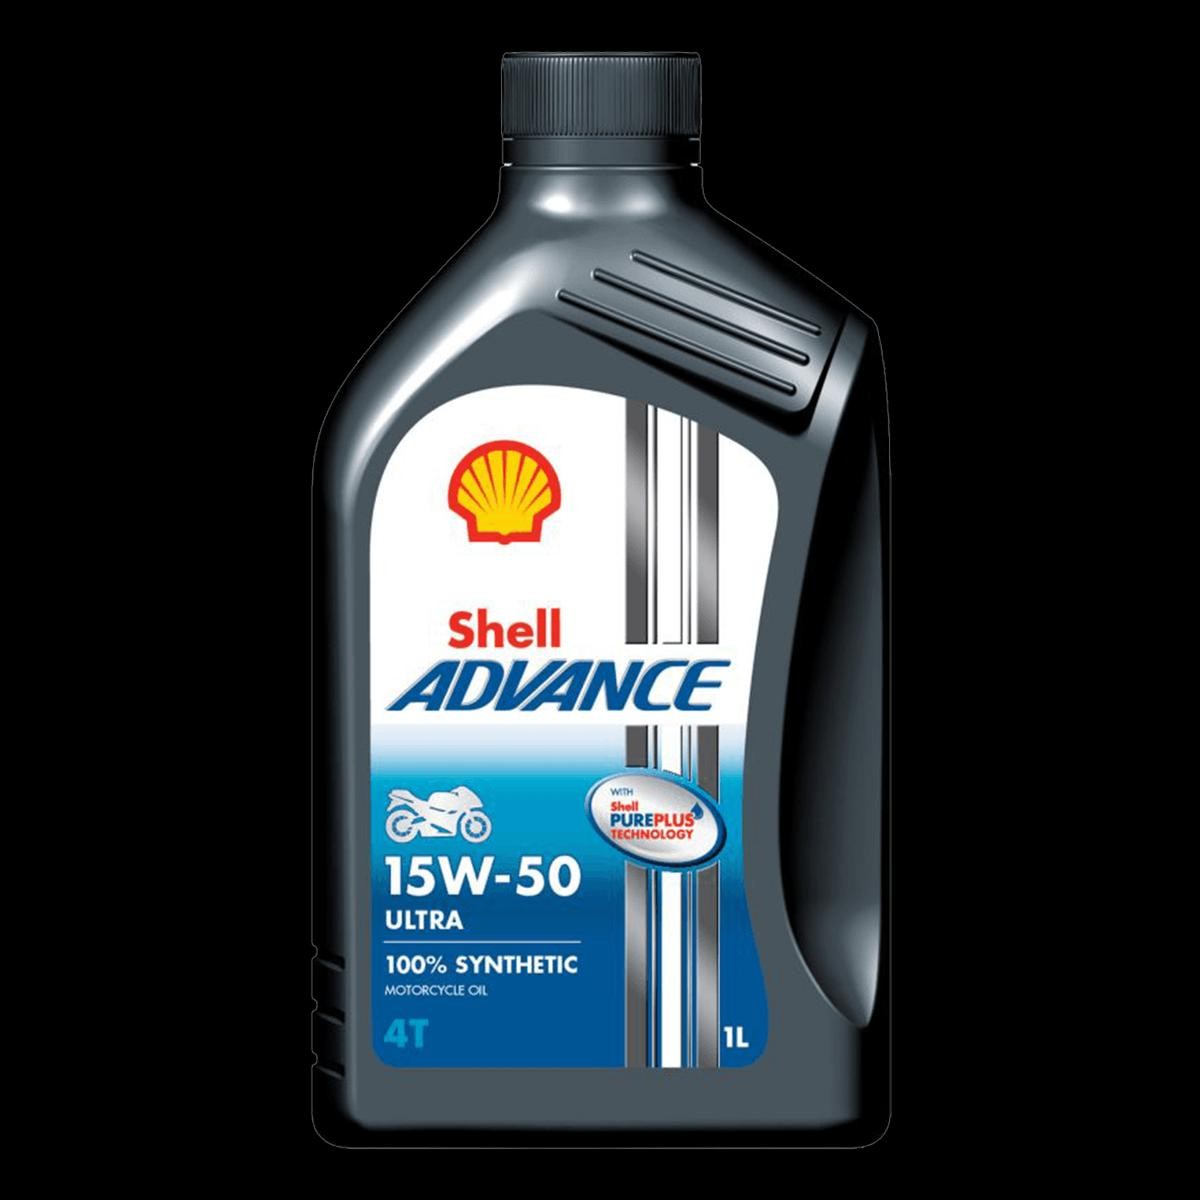 Engine oil SHELL 15W-50, 1l, Mineral Oil longlife 550044453